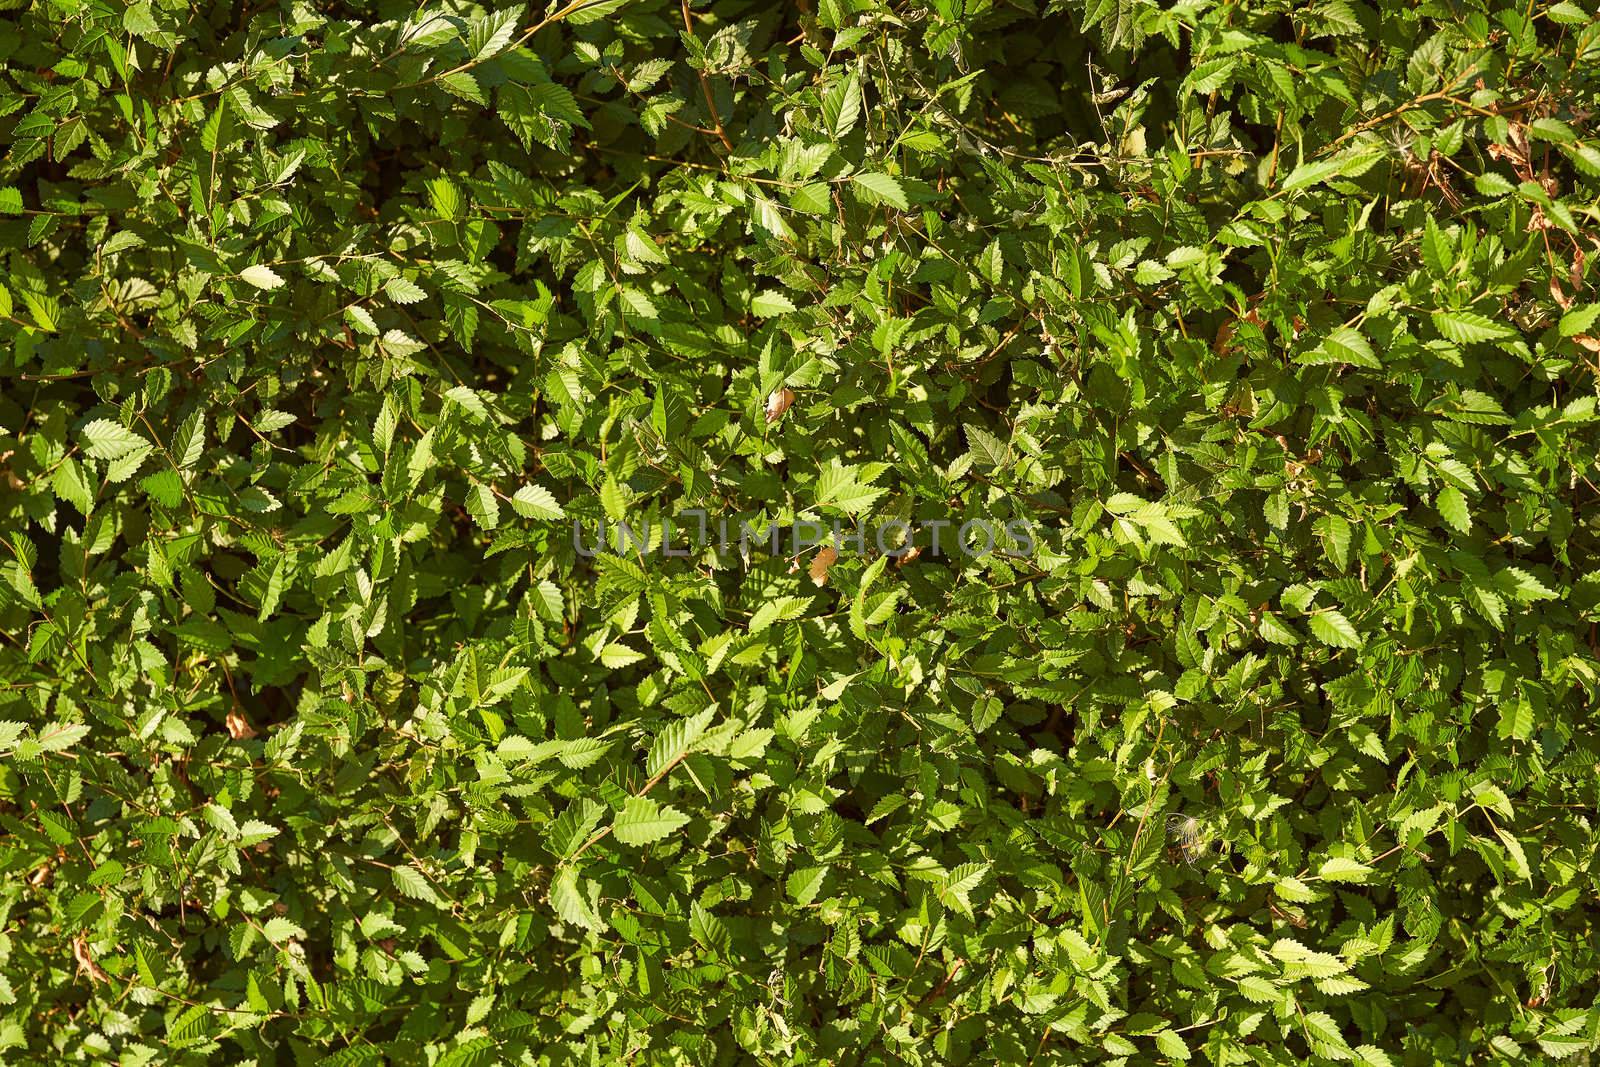 Green bush in the sun. Light effects. Natural background. High quality photo